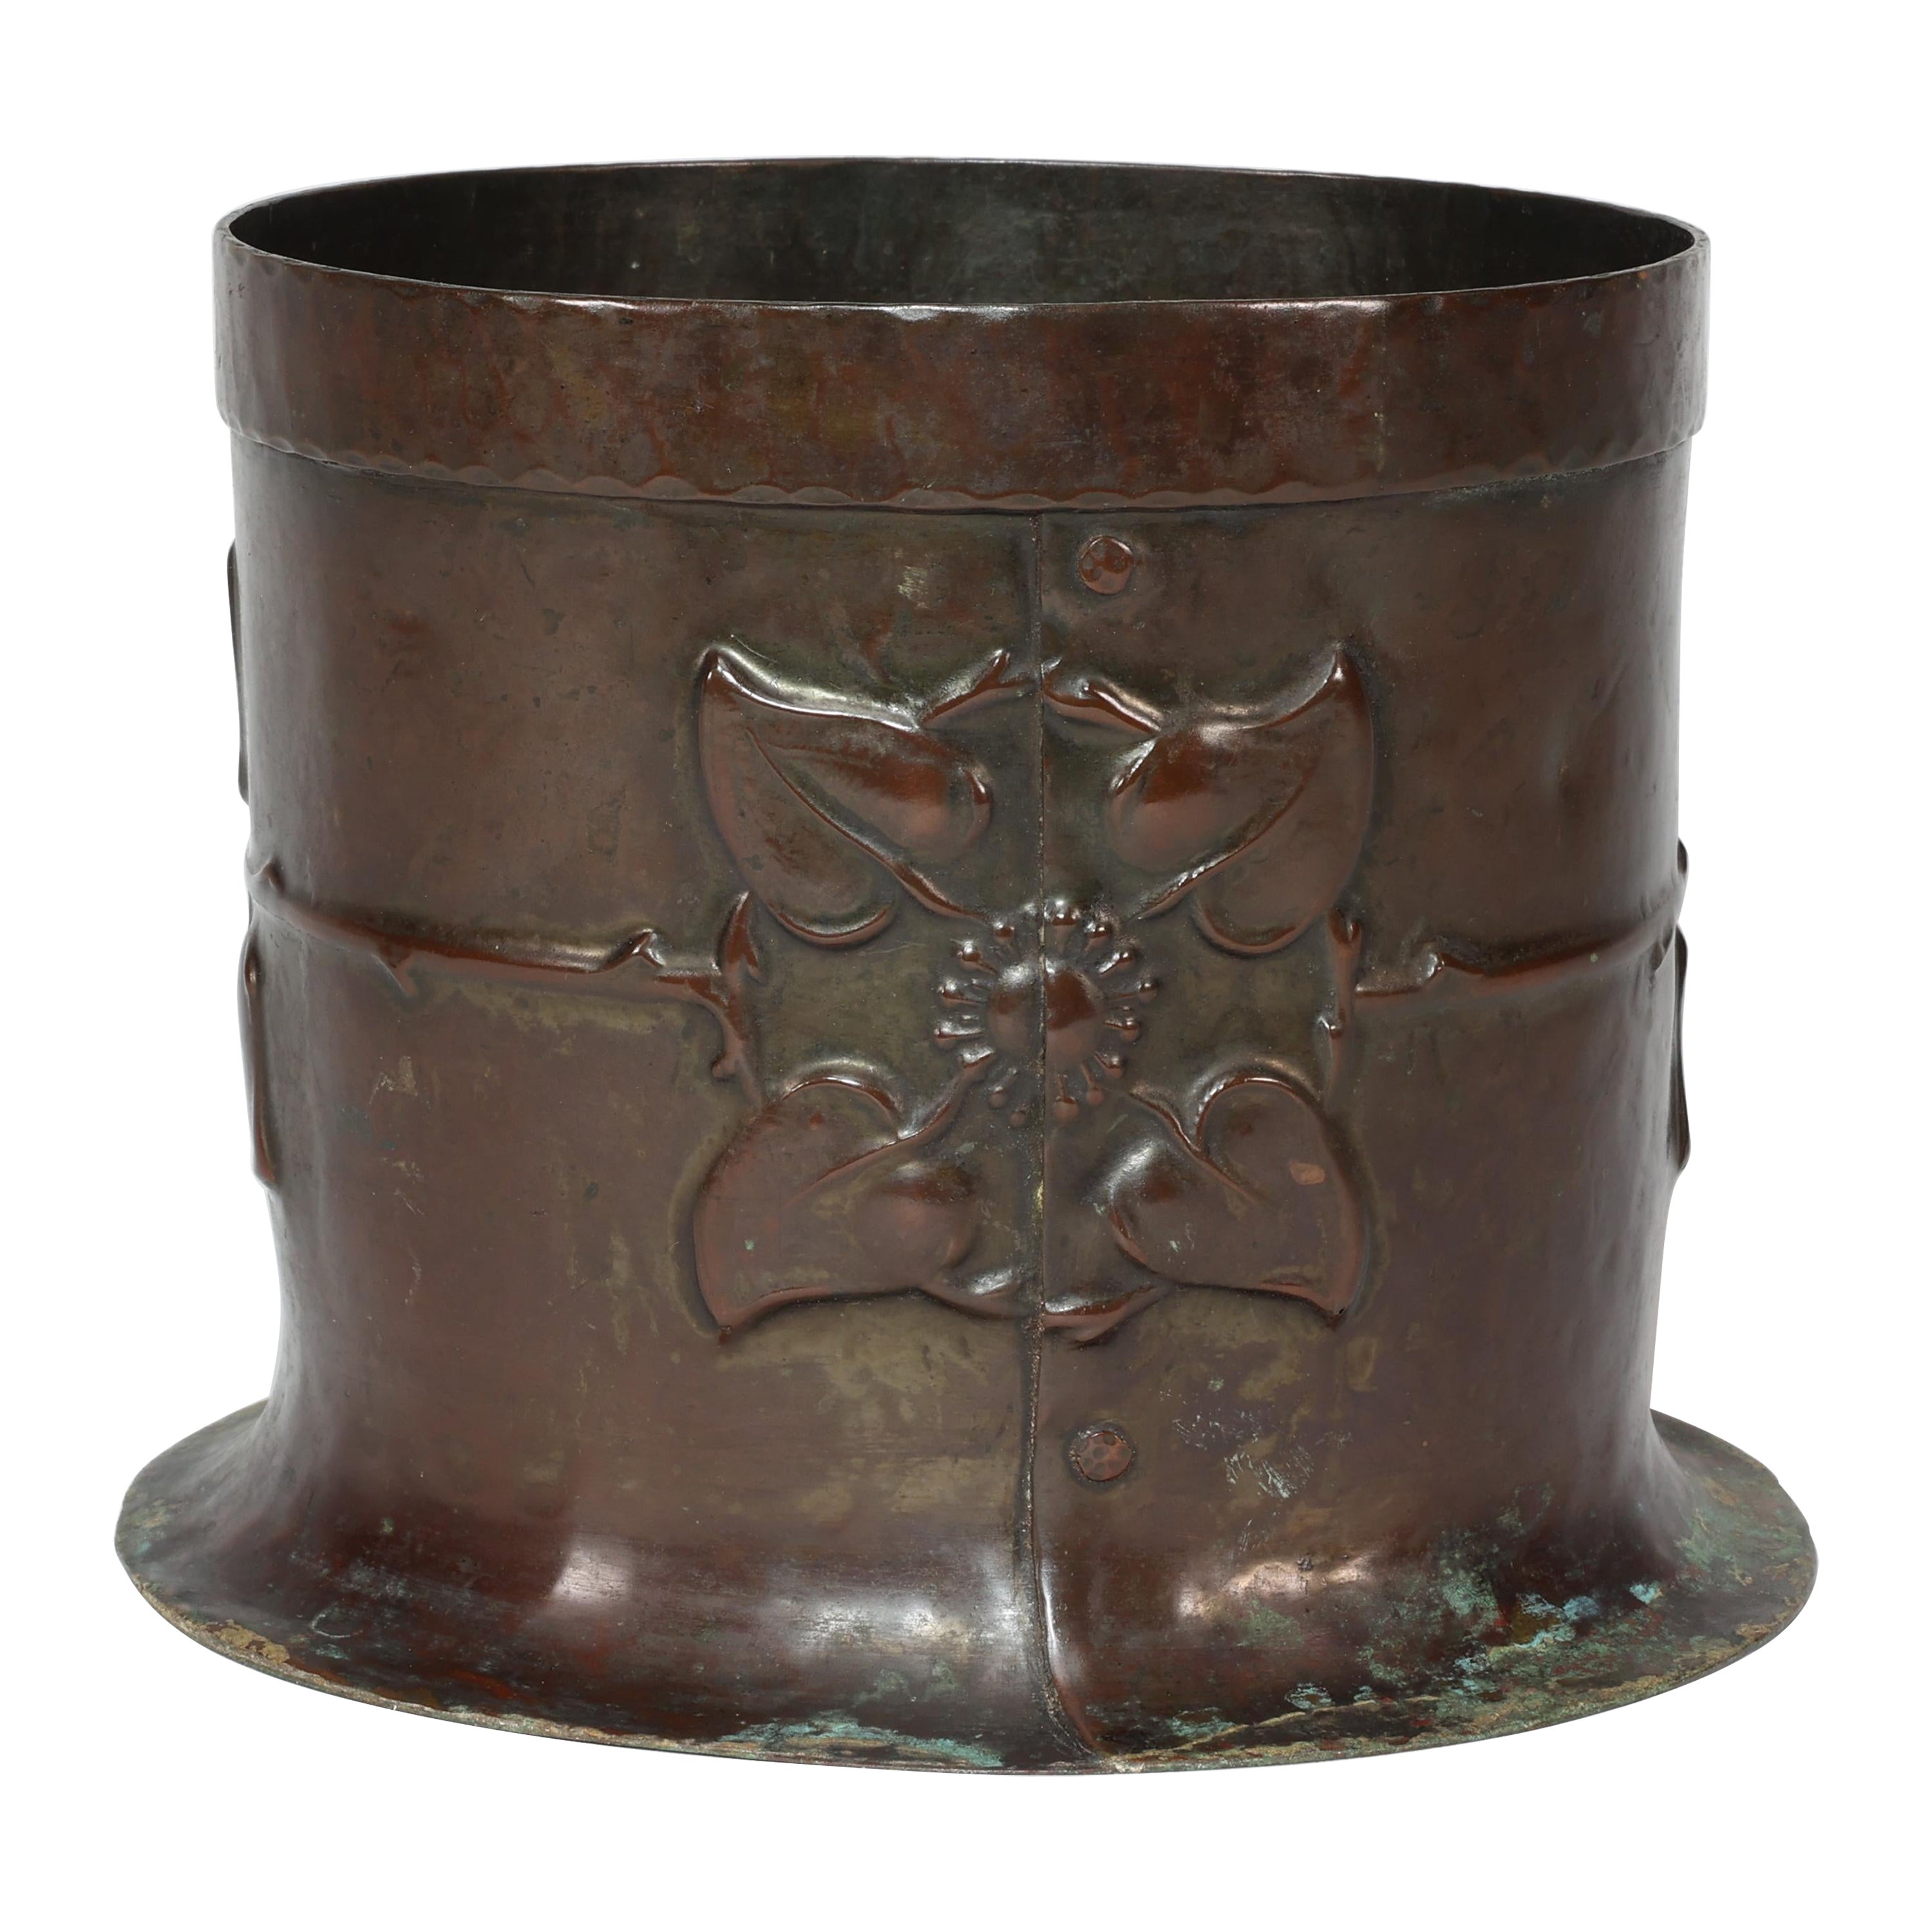 Guild of Handicraft style of. An Arts & Crafts copper plant pot with two florets For Sale